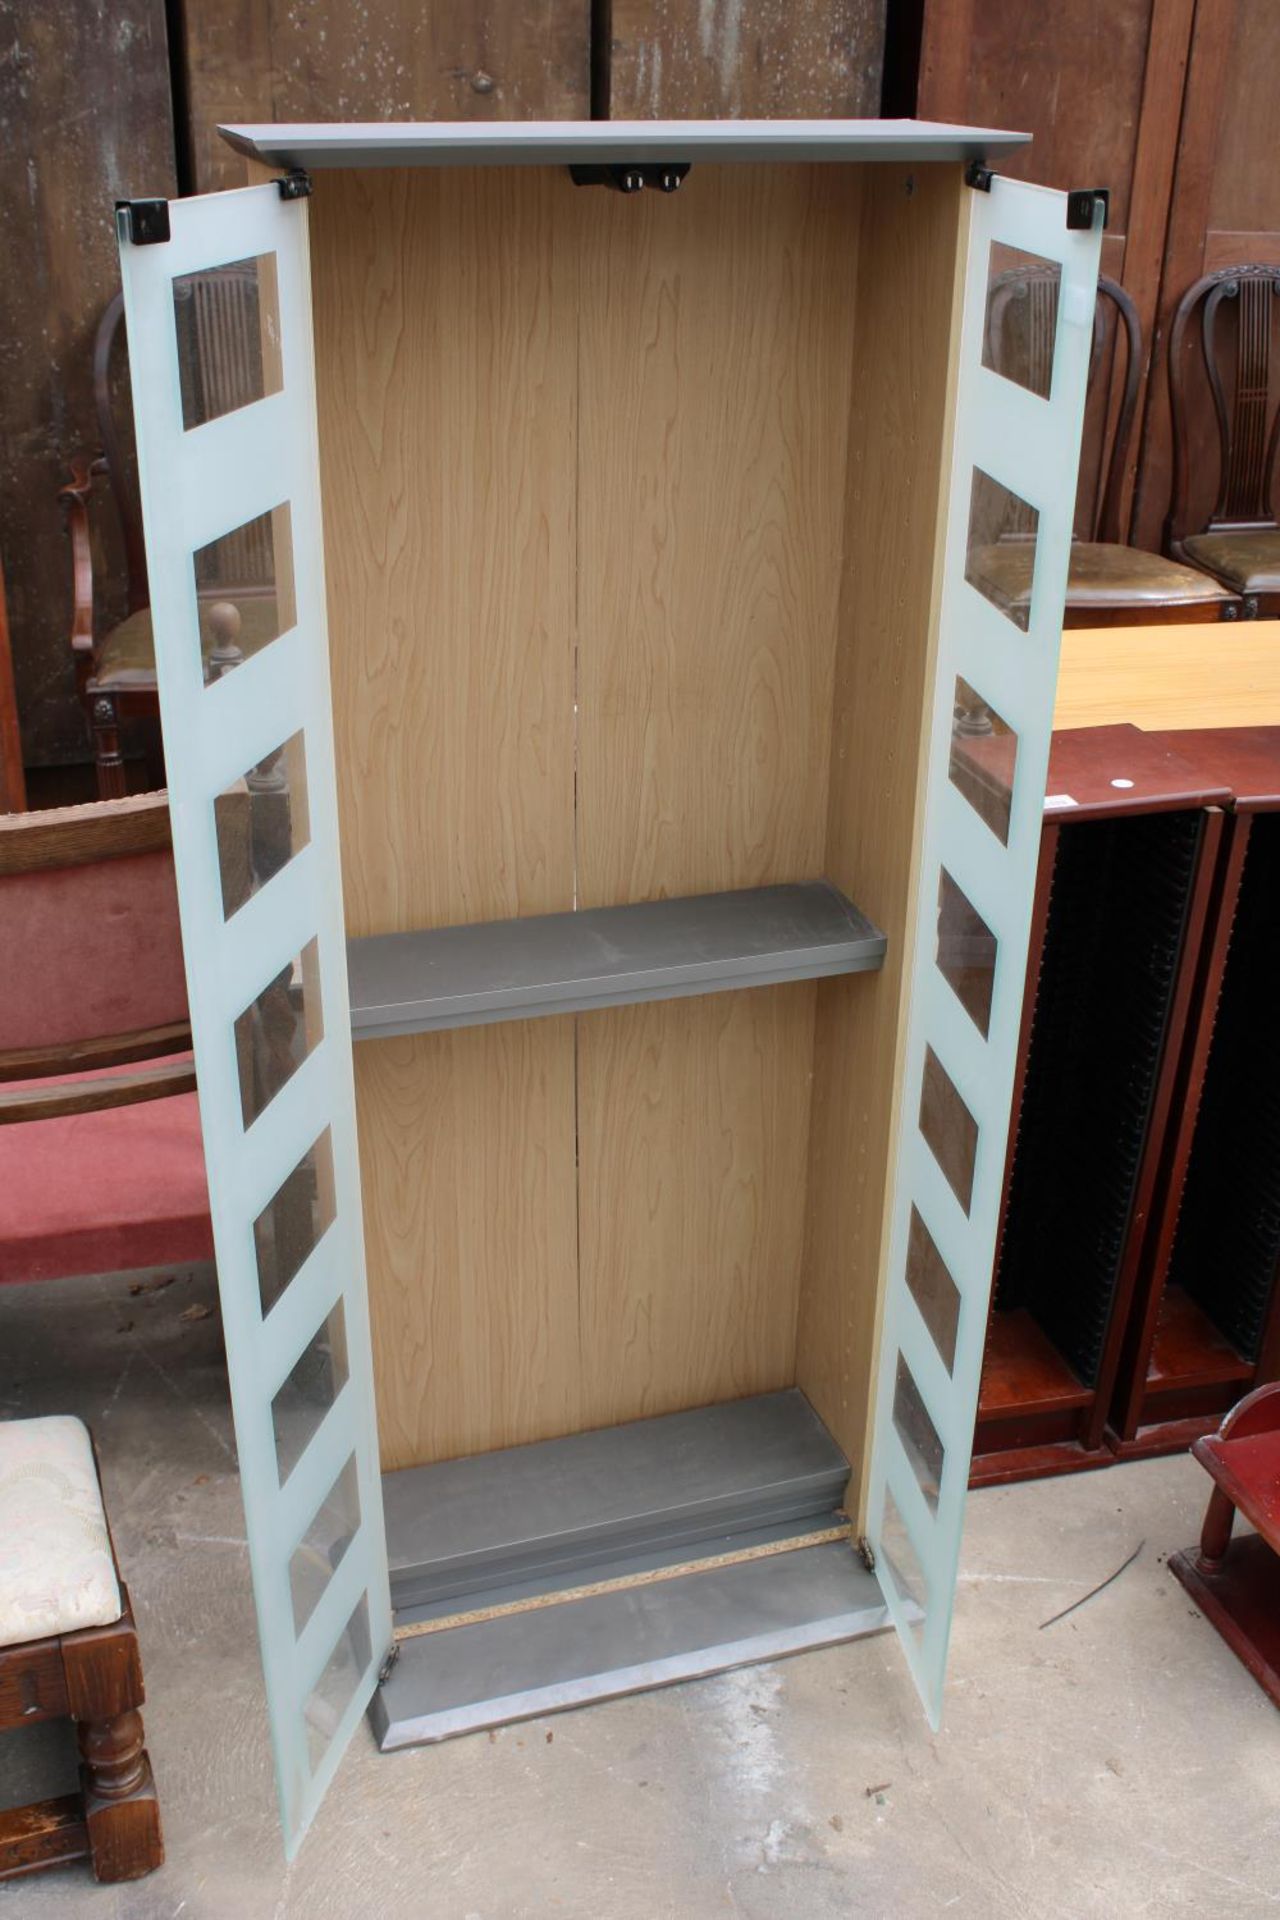 A MODERN DISPLAY CABINET WITH SMOKED GLASS DOORS, 21" WIDE - Image 2 of 2